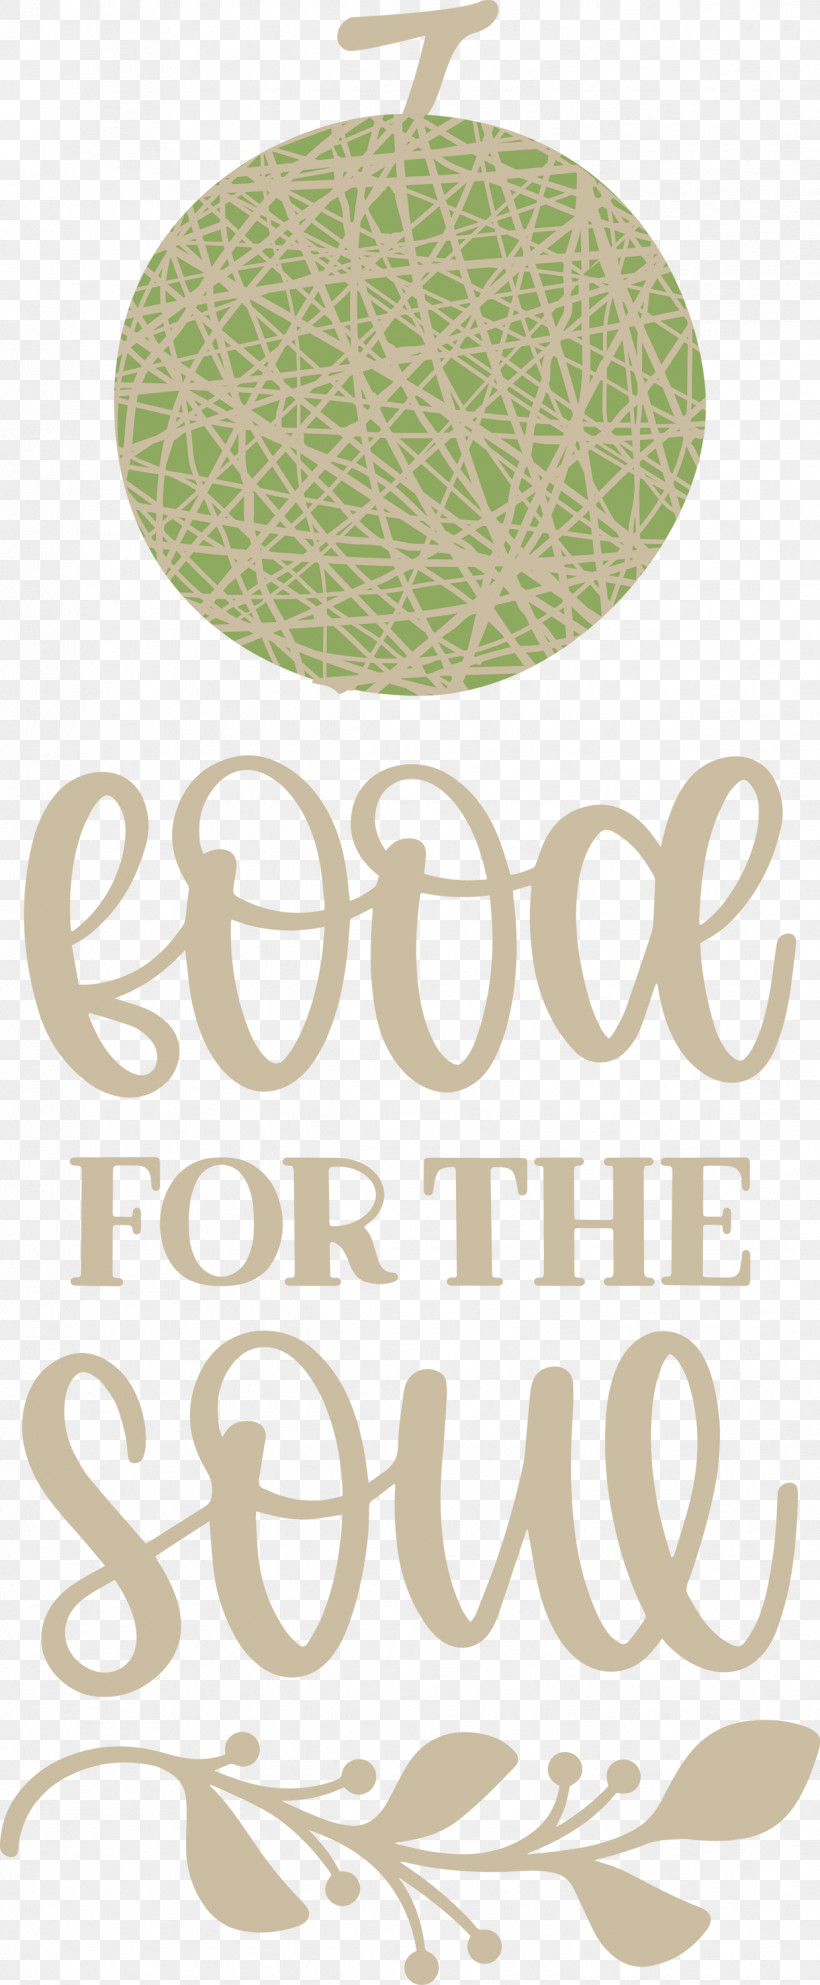 Food For The Soul Food Cooking, PNG, 1239x3000px, Food, Cooking, Logo, Poster Download Free